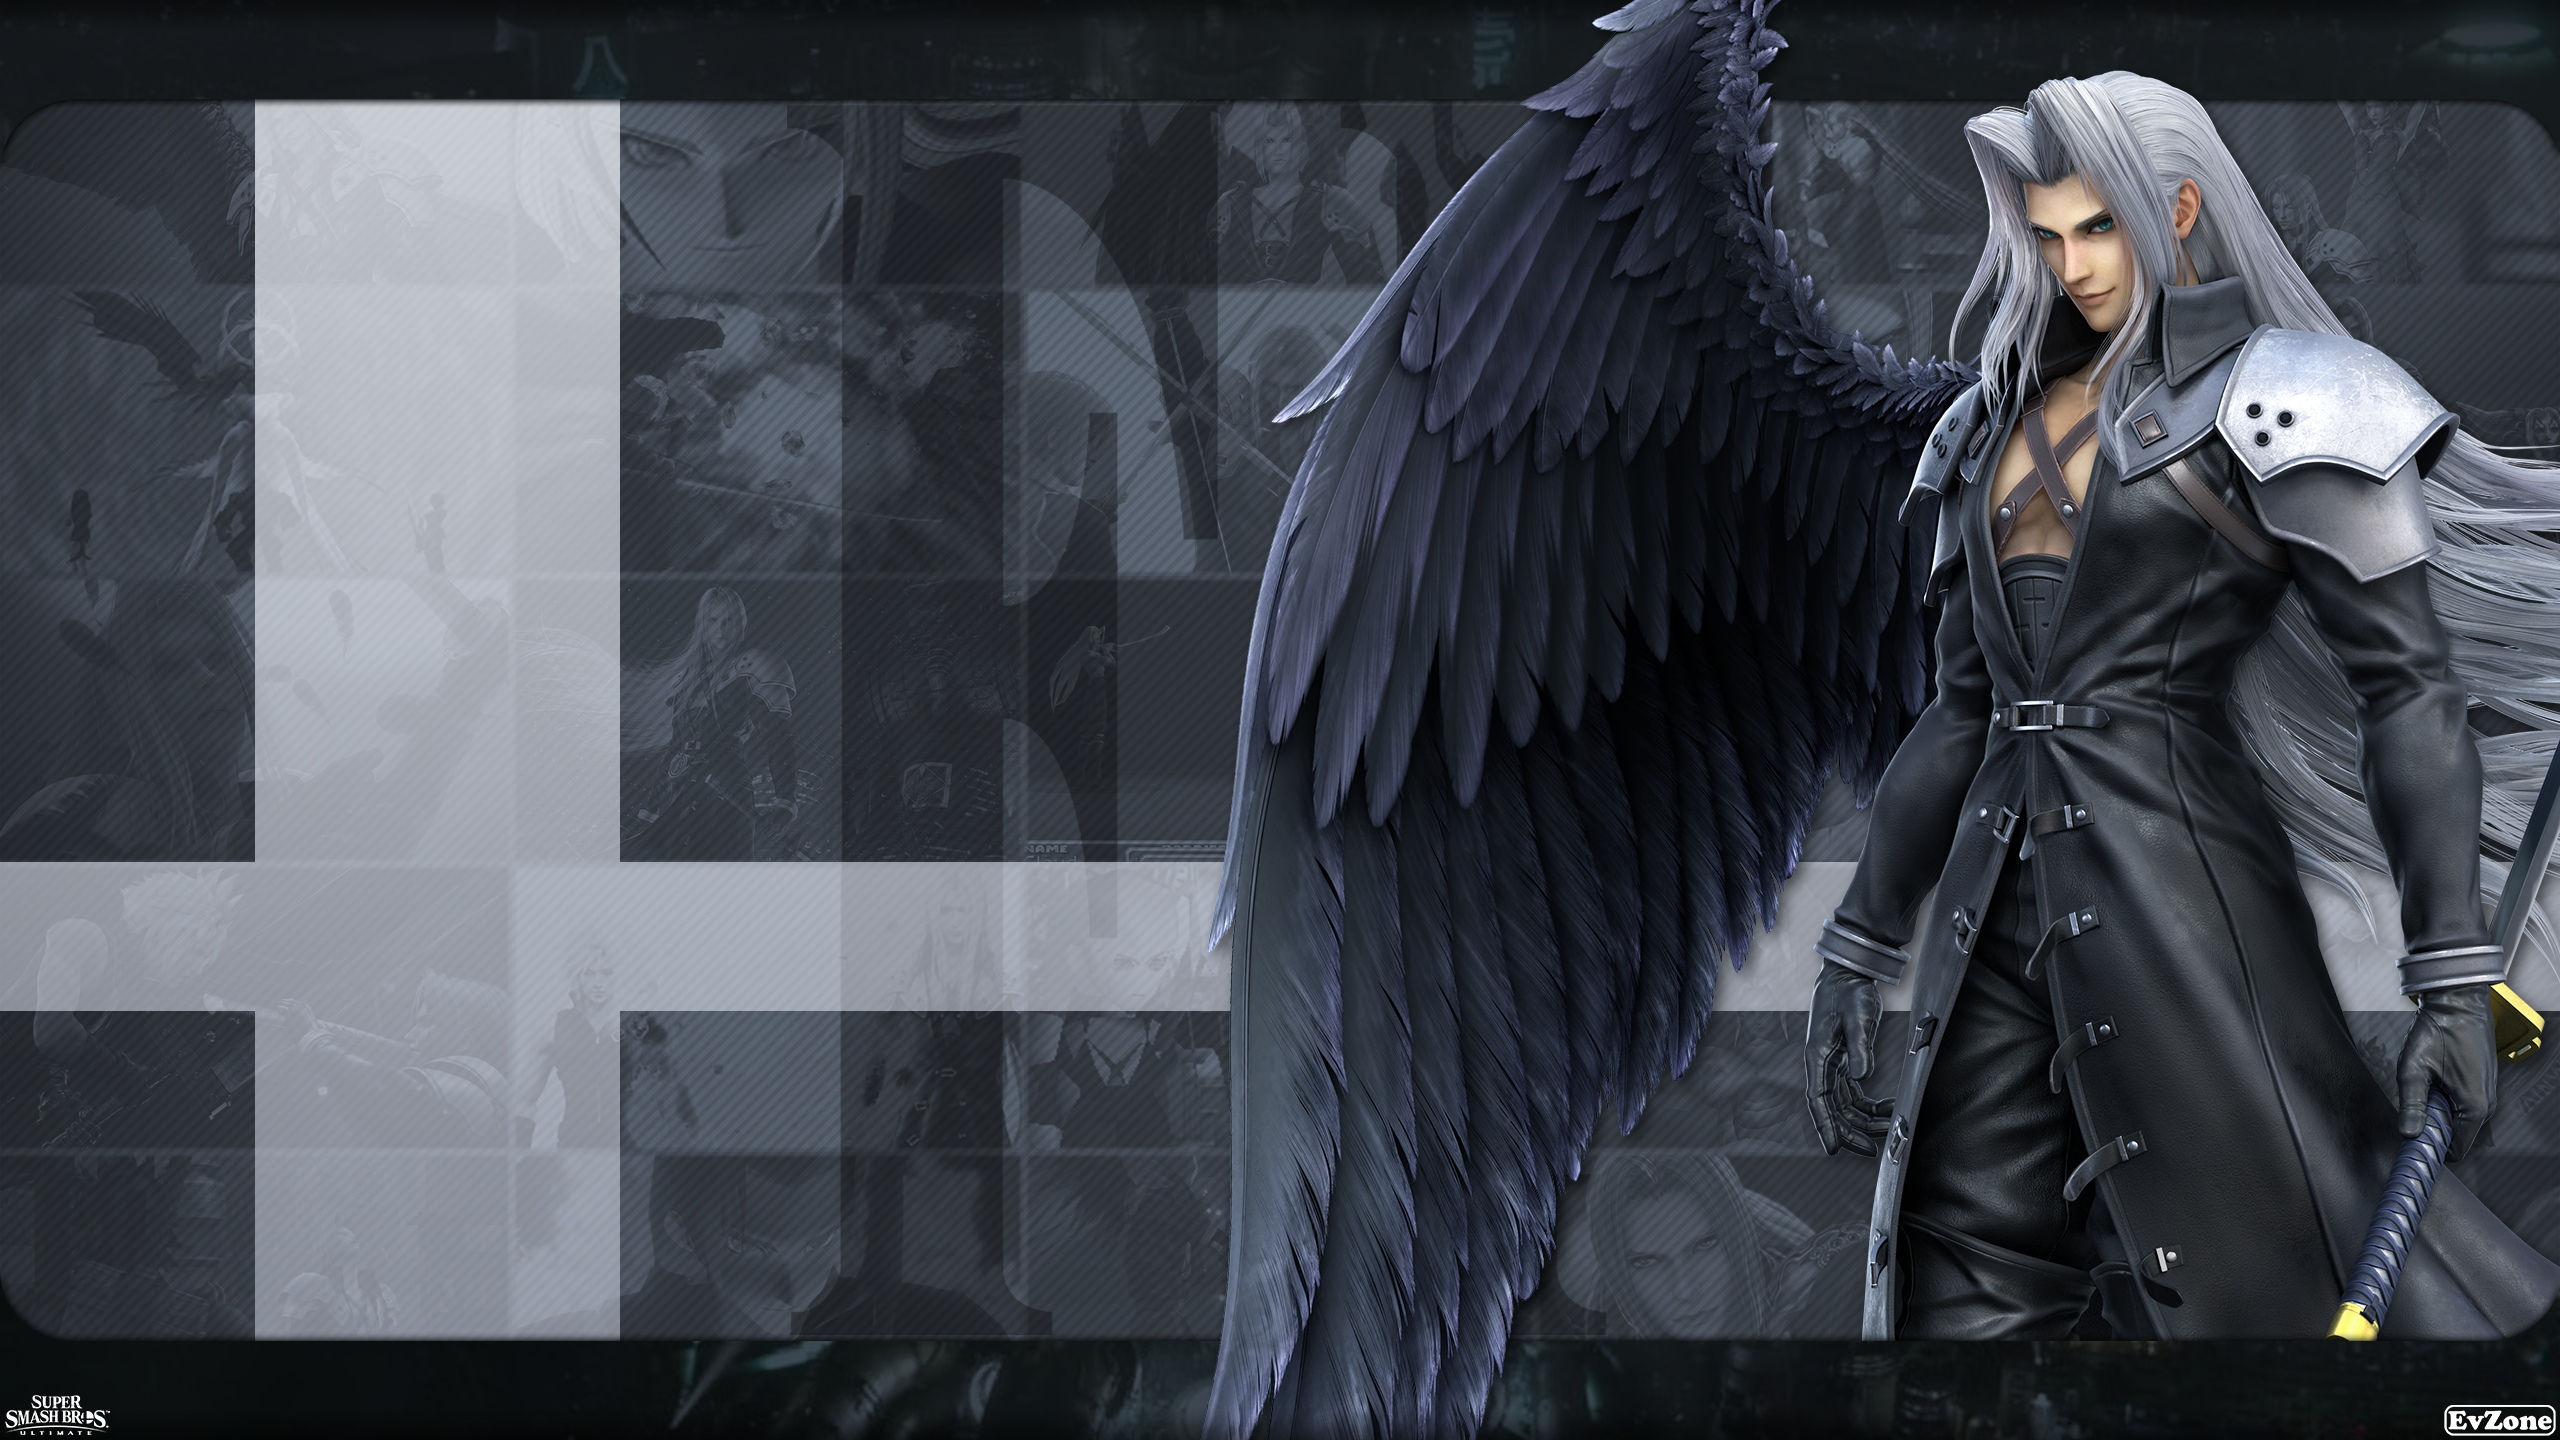 General 2560x1440 Super Smash Bros. Ultimate watermarked Sephiroth video games video game characters Nintendo Final Fantasy VII Square Enix